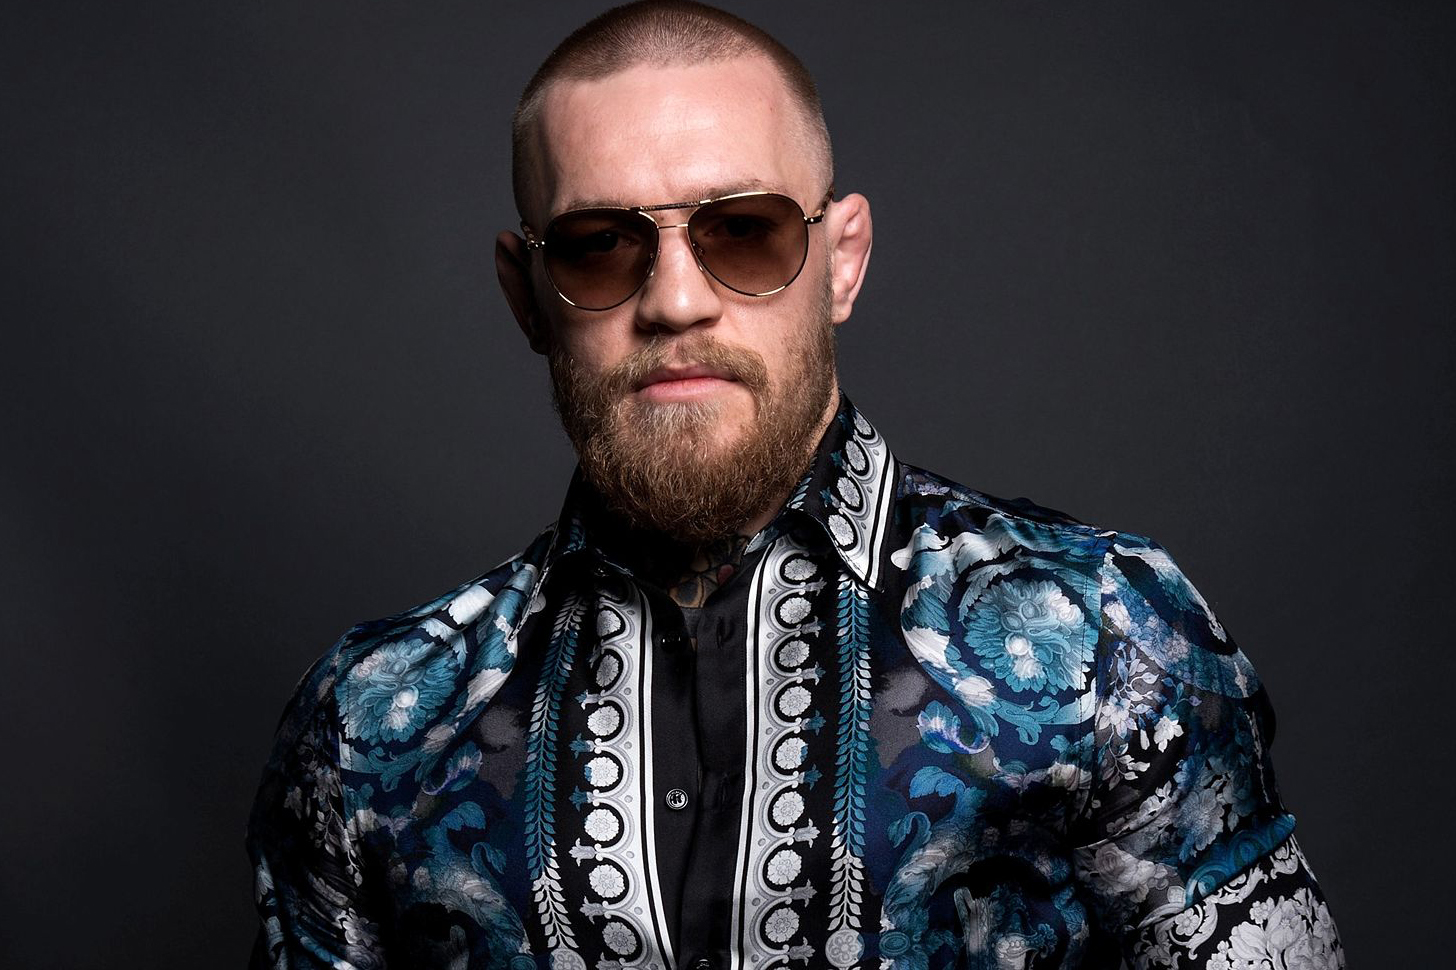 Conor McGregor Sheds Light on His 